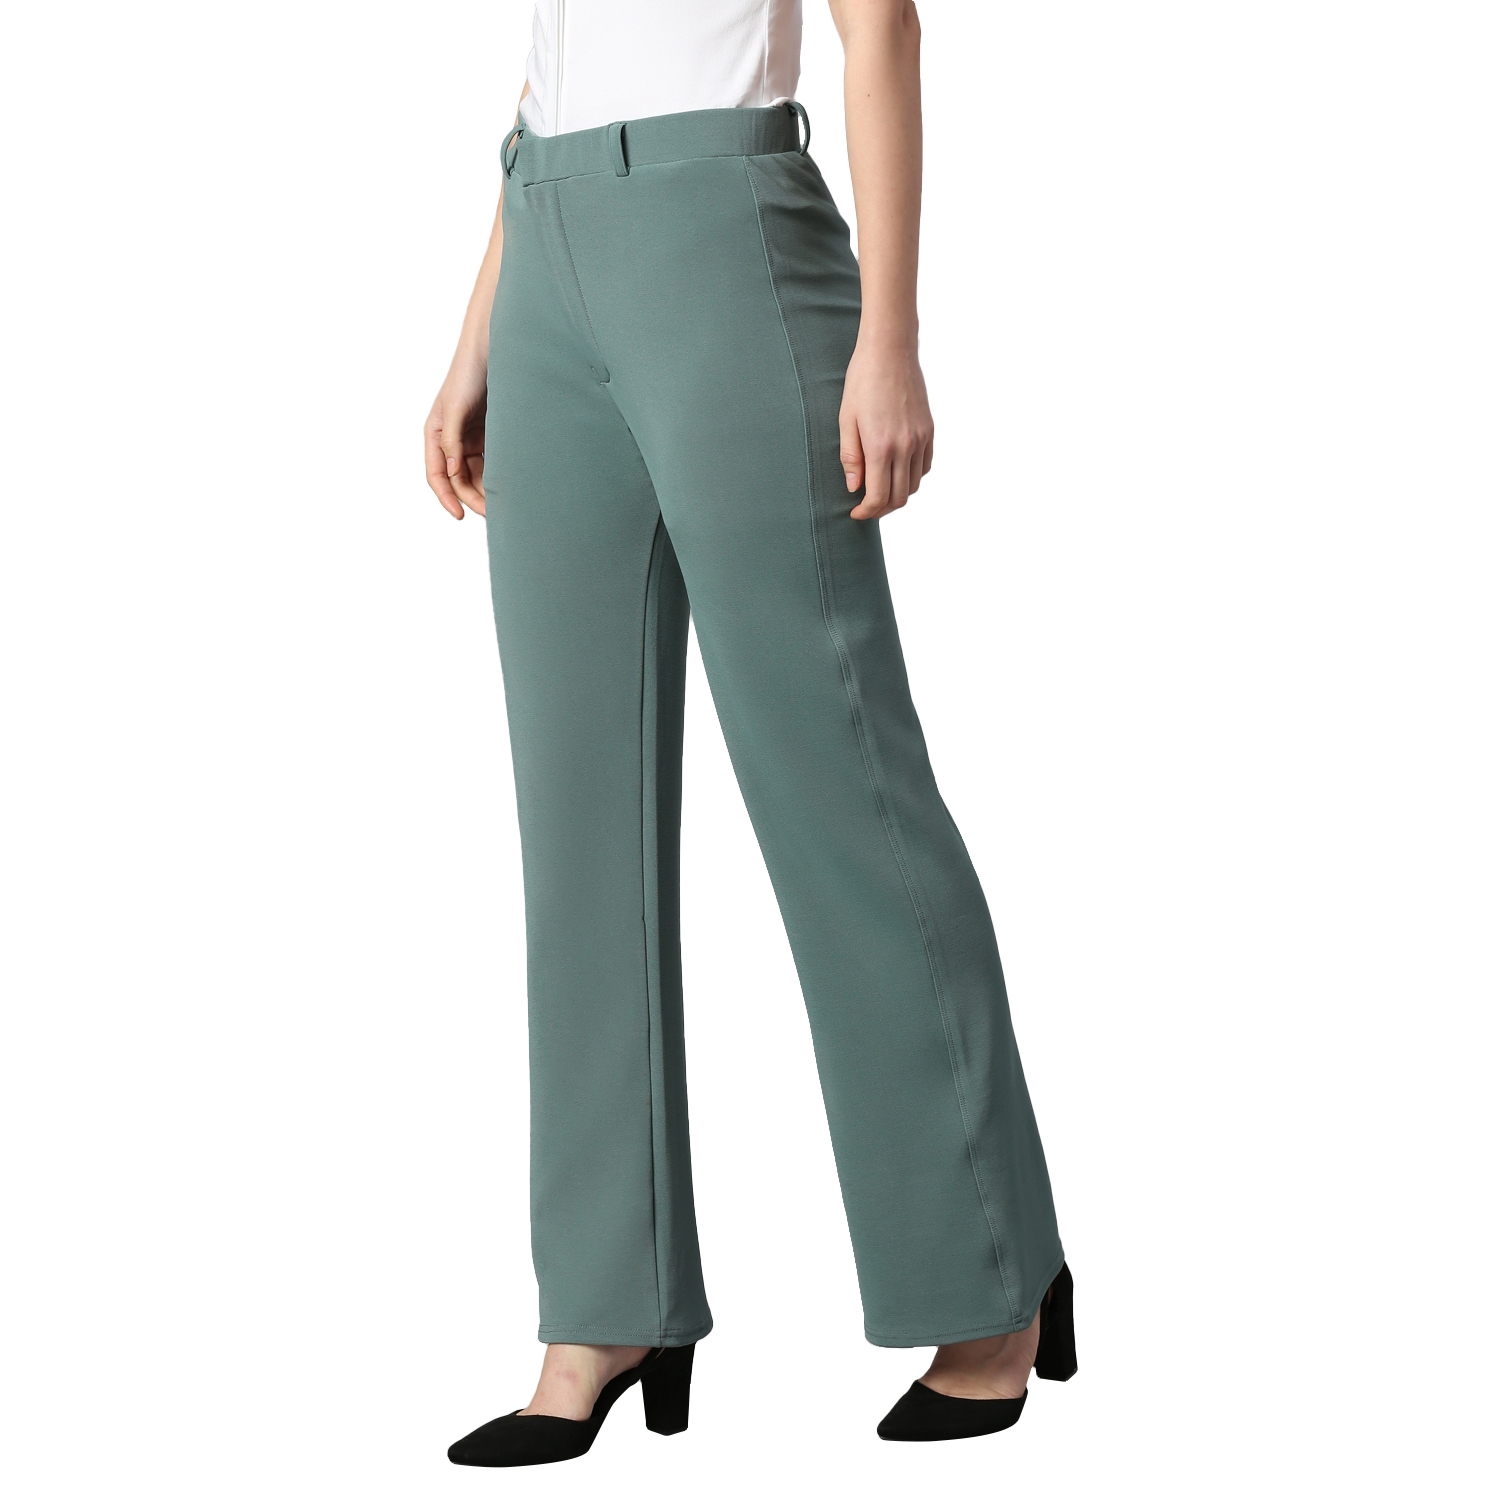 Cotton Lycra Mint Trouser For Women's.Ladies Casual Trouser,Track Pant,Girls  stylish Trouser Pant.Elastic Staright Pants, for Casual Office Work wear. Slim Fit Formal Trousers/Pant.formal Trouser For Womens.Womens Trousers  Cotton Pant.Formal Tousers For